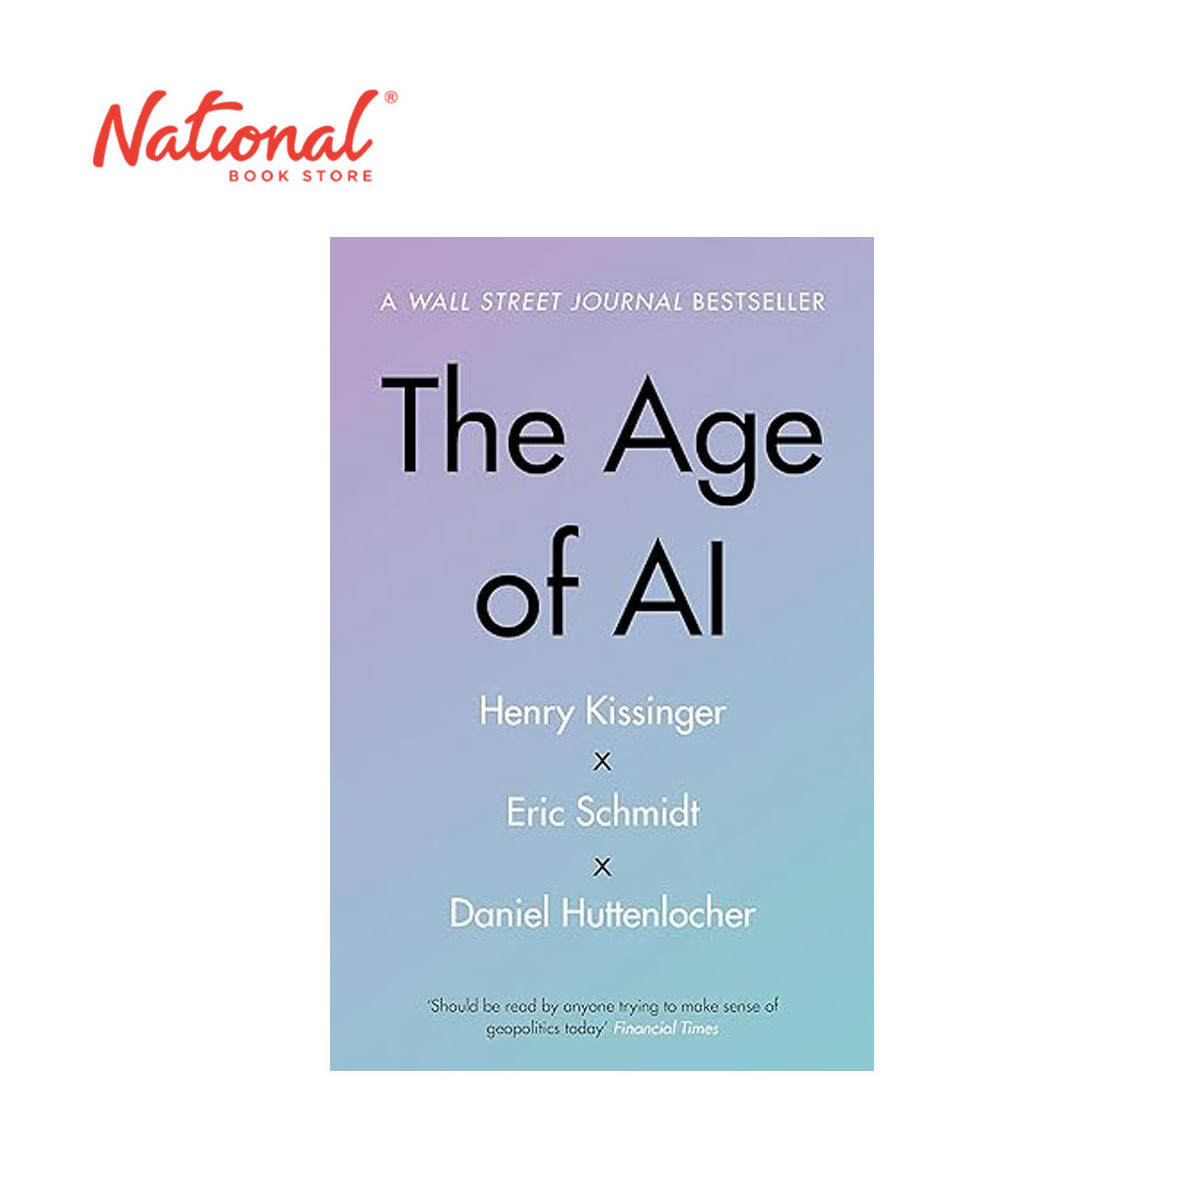 The Age of AI by Henry Kissinger - Trade Paperback - Business Books